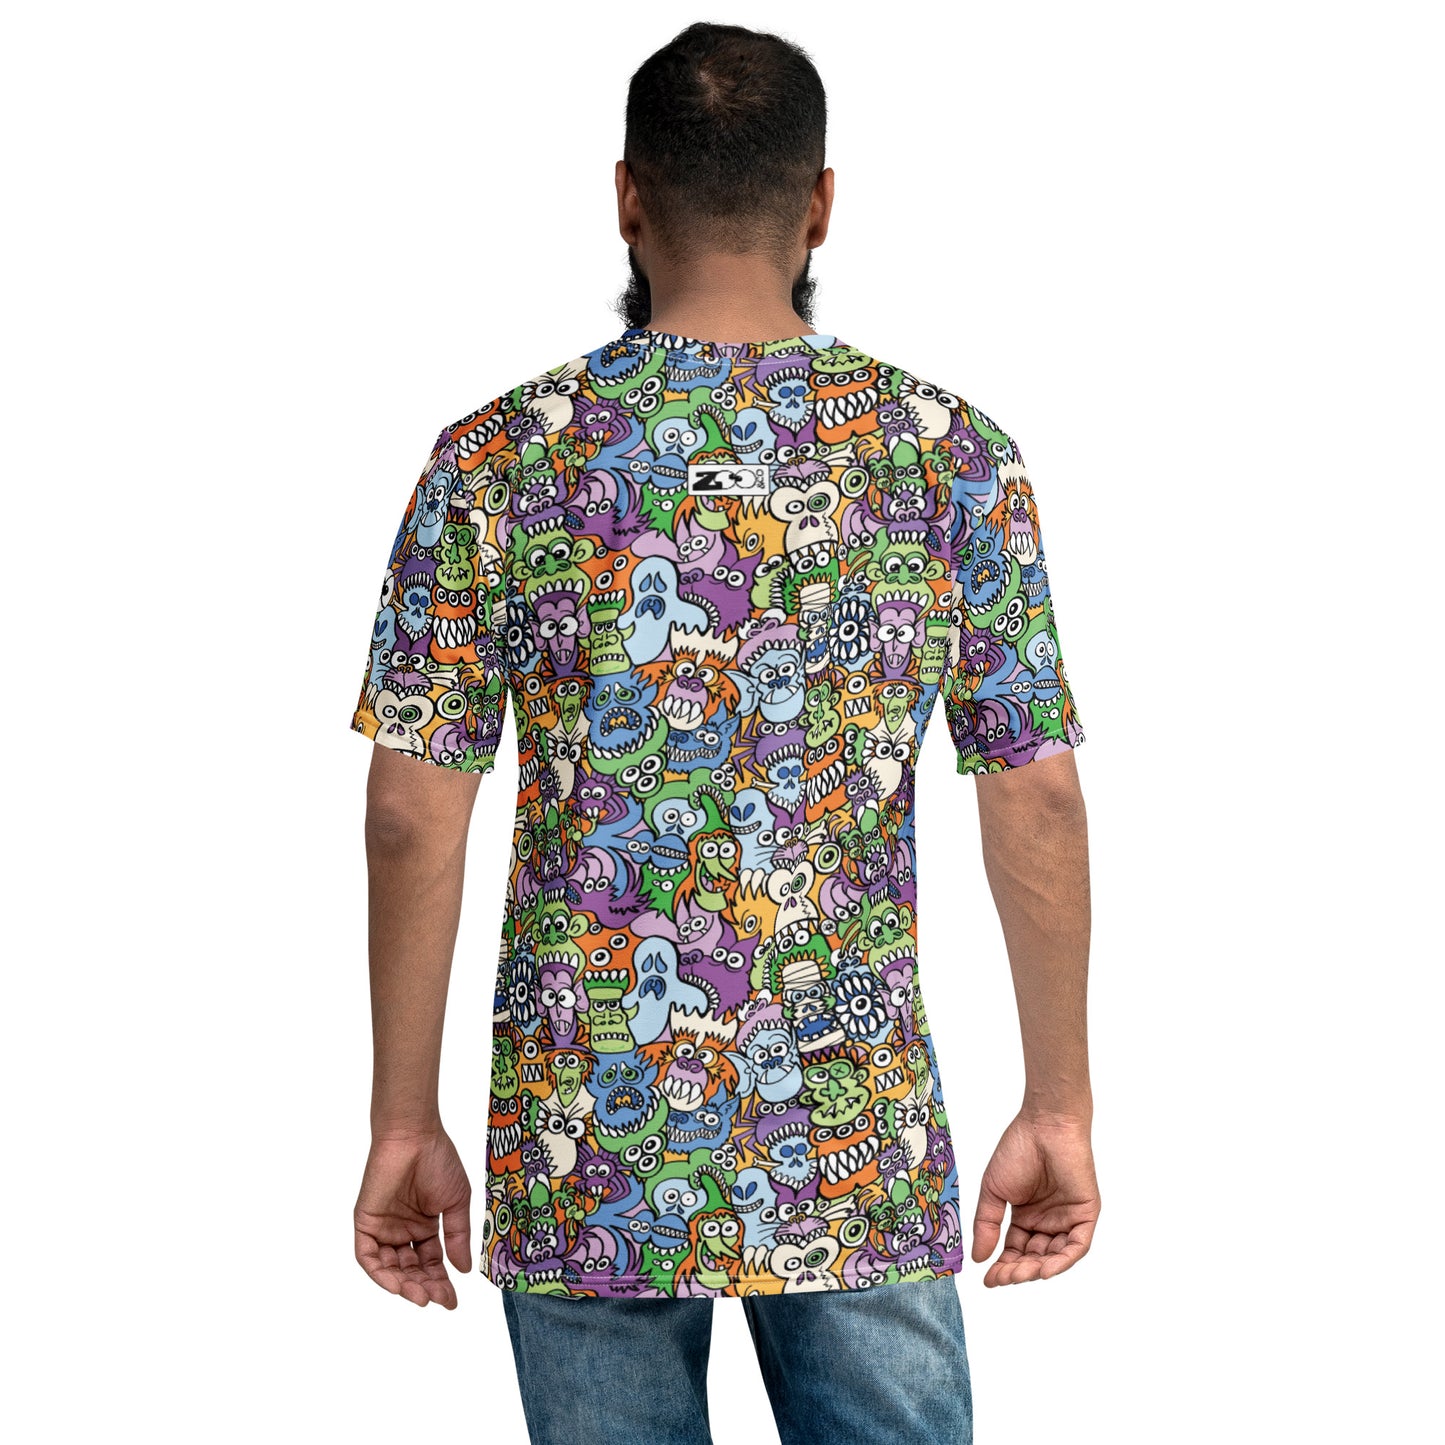 All the spooky Halloween monsters in a pattern design Men's t-shirt. Back view